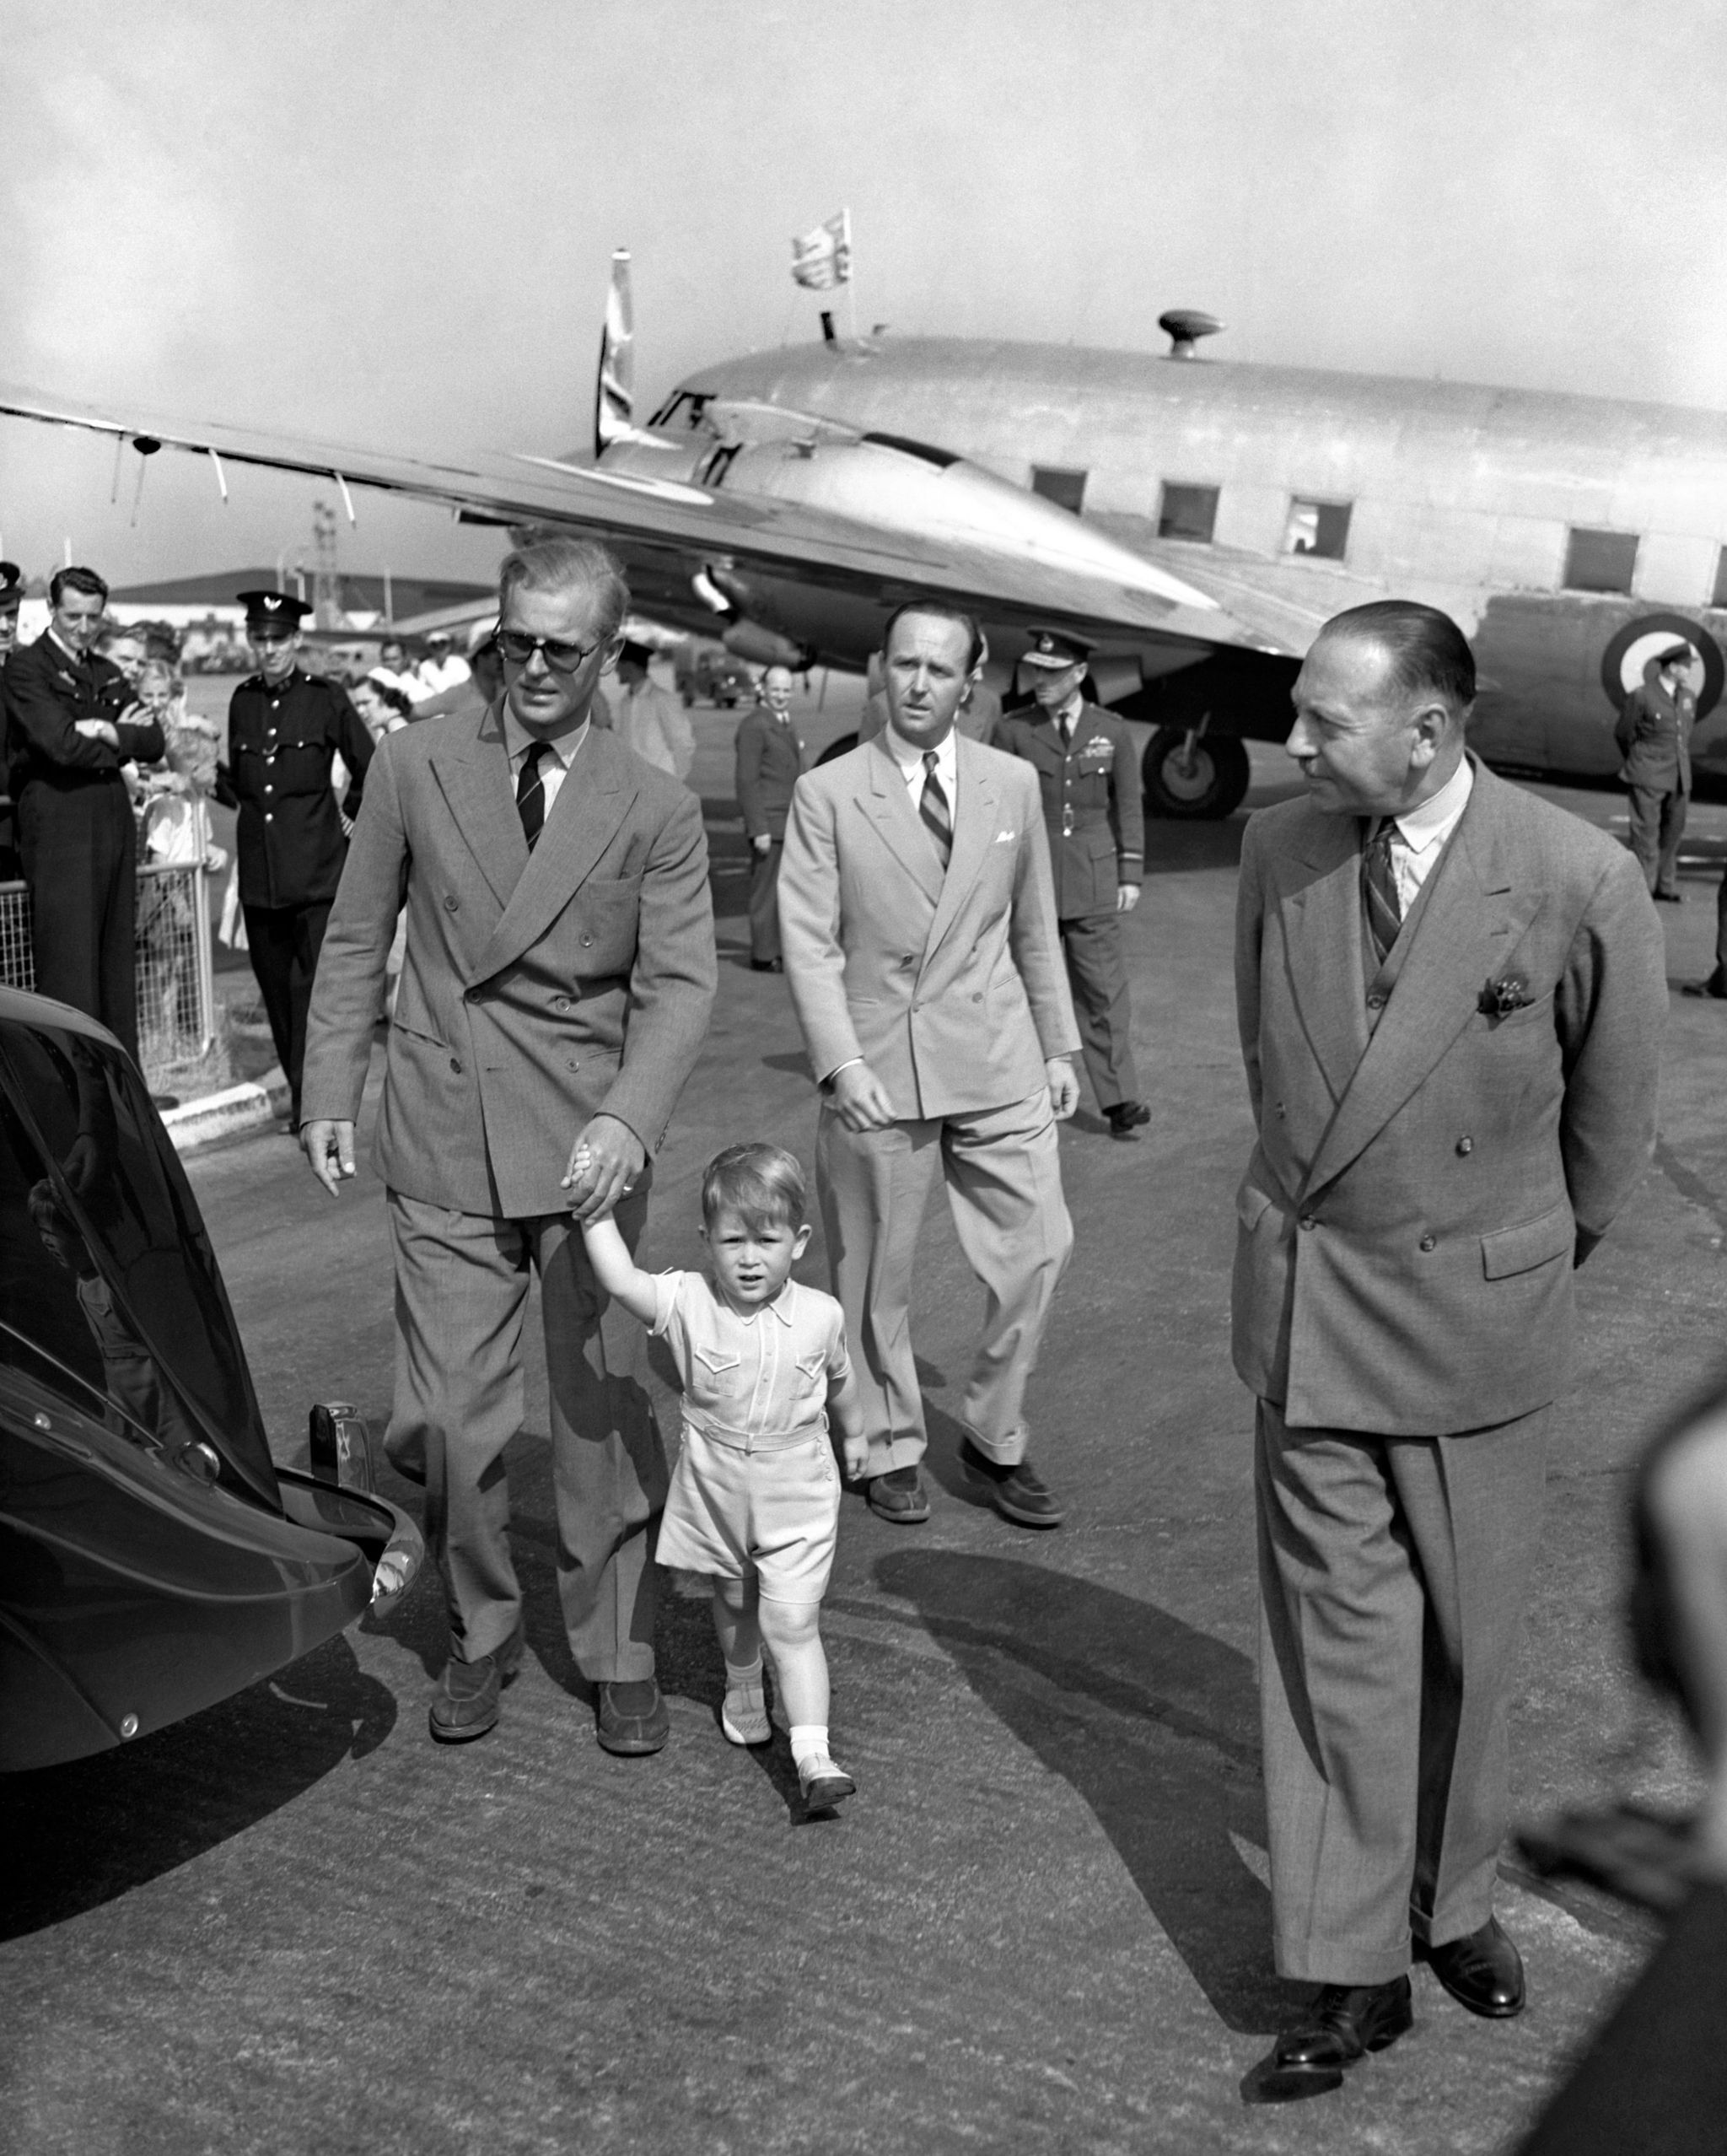 Prince Charles leading his father by the hand after the Duke of Edinburgh arrived home from Malta on 21 July 1951.